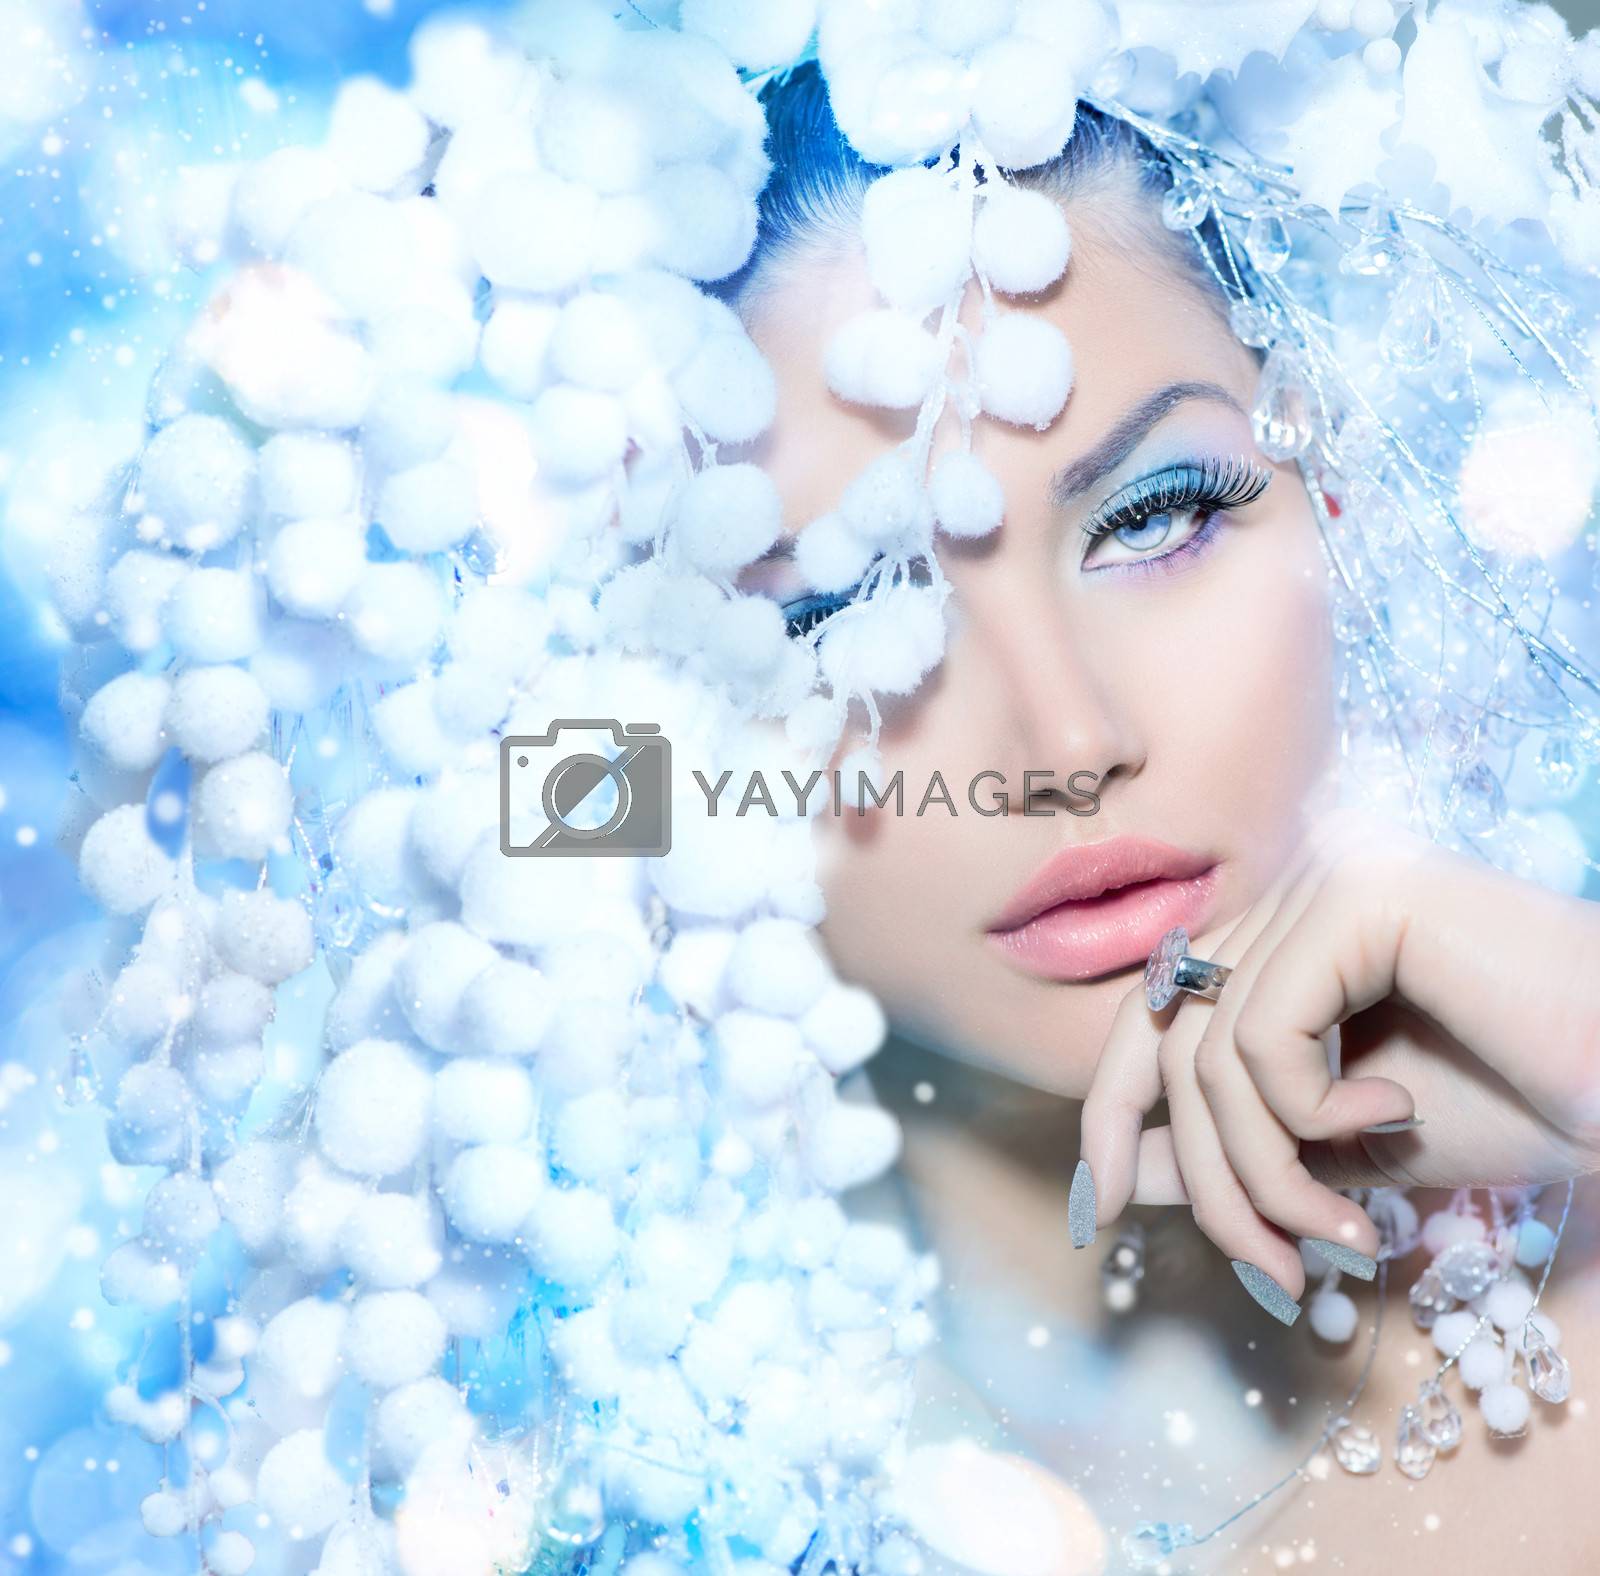 Royalty free image of Winter Beauty. Beautiful Fashion Model Girl with Snow Hair style by SubbotinaA